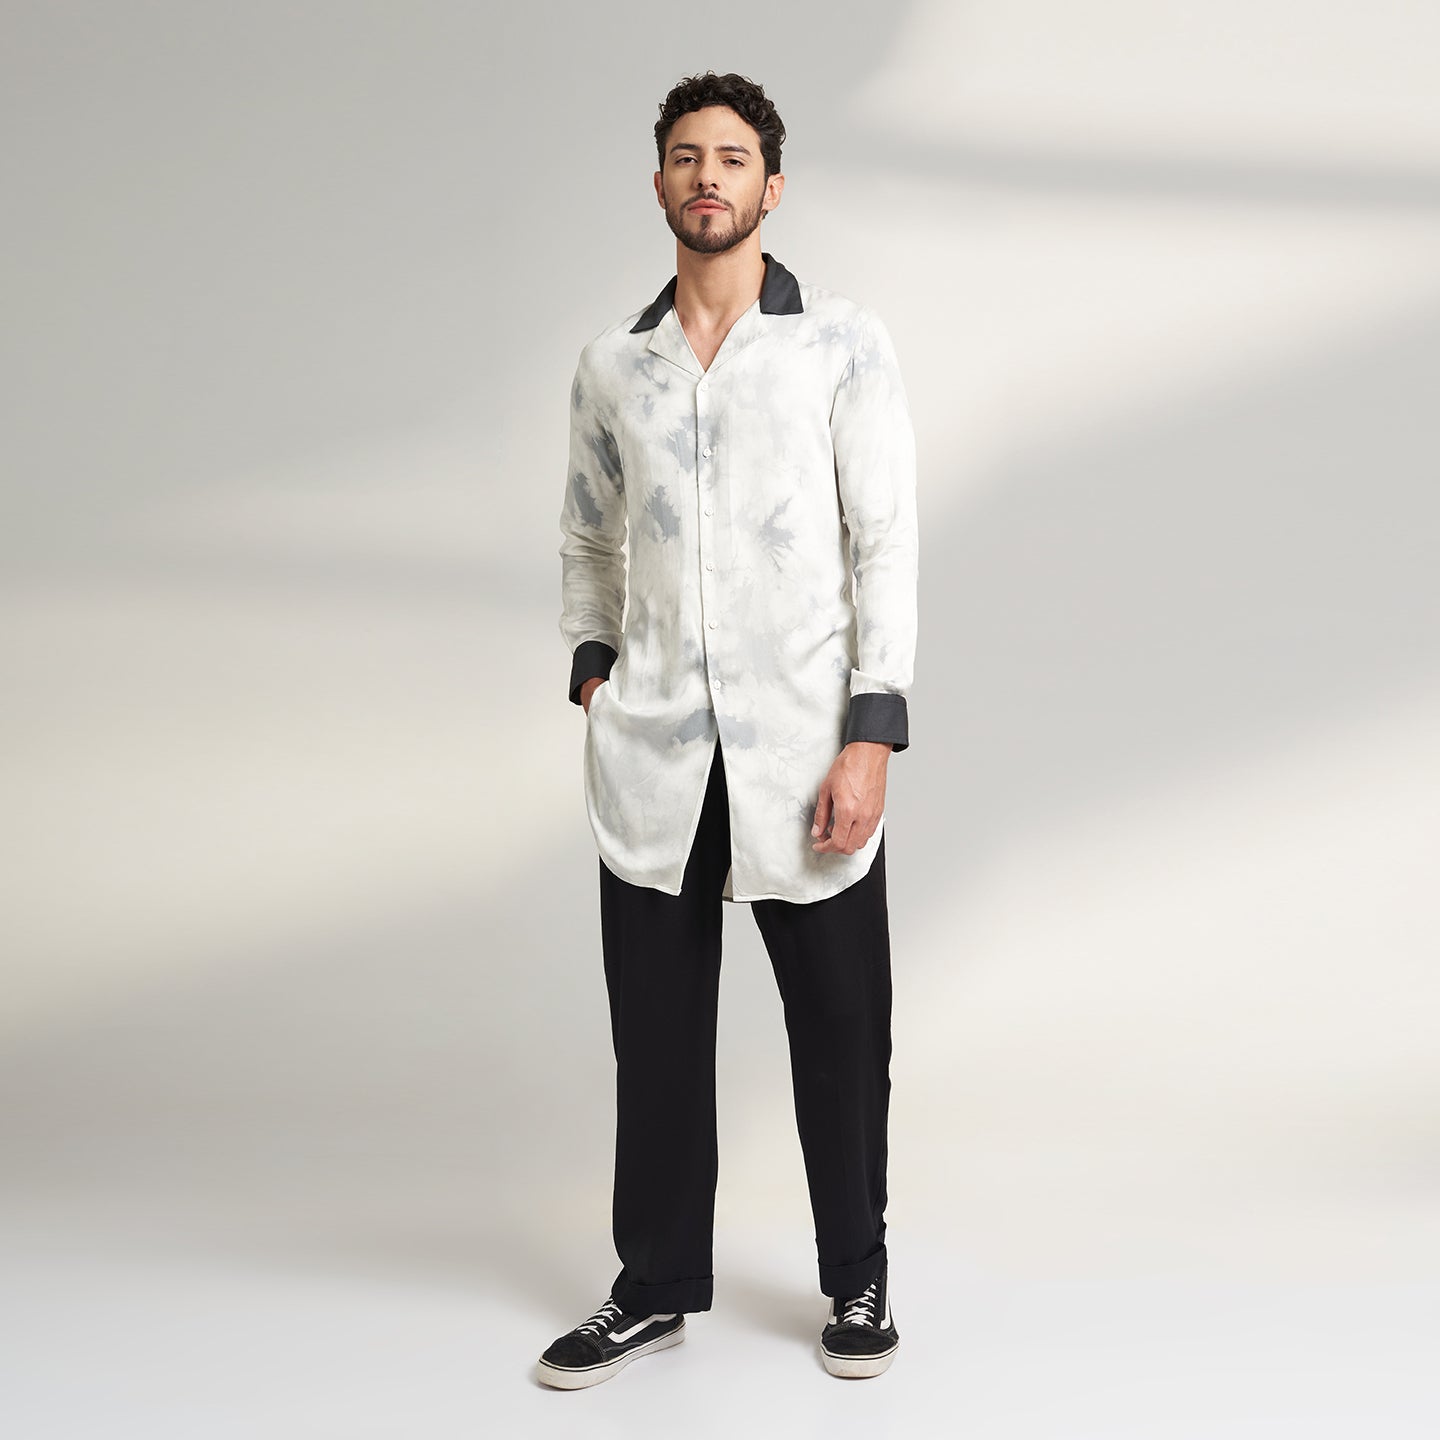 A medium-sized model showcases a Long Printed Cuban Collar shirt in organic Lotus Stem fabric, featuring a solid black collar and cuffs. Paired seamlessly with black trousers made from the same organic lotus stem fabric, presenting a stylish front pose.